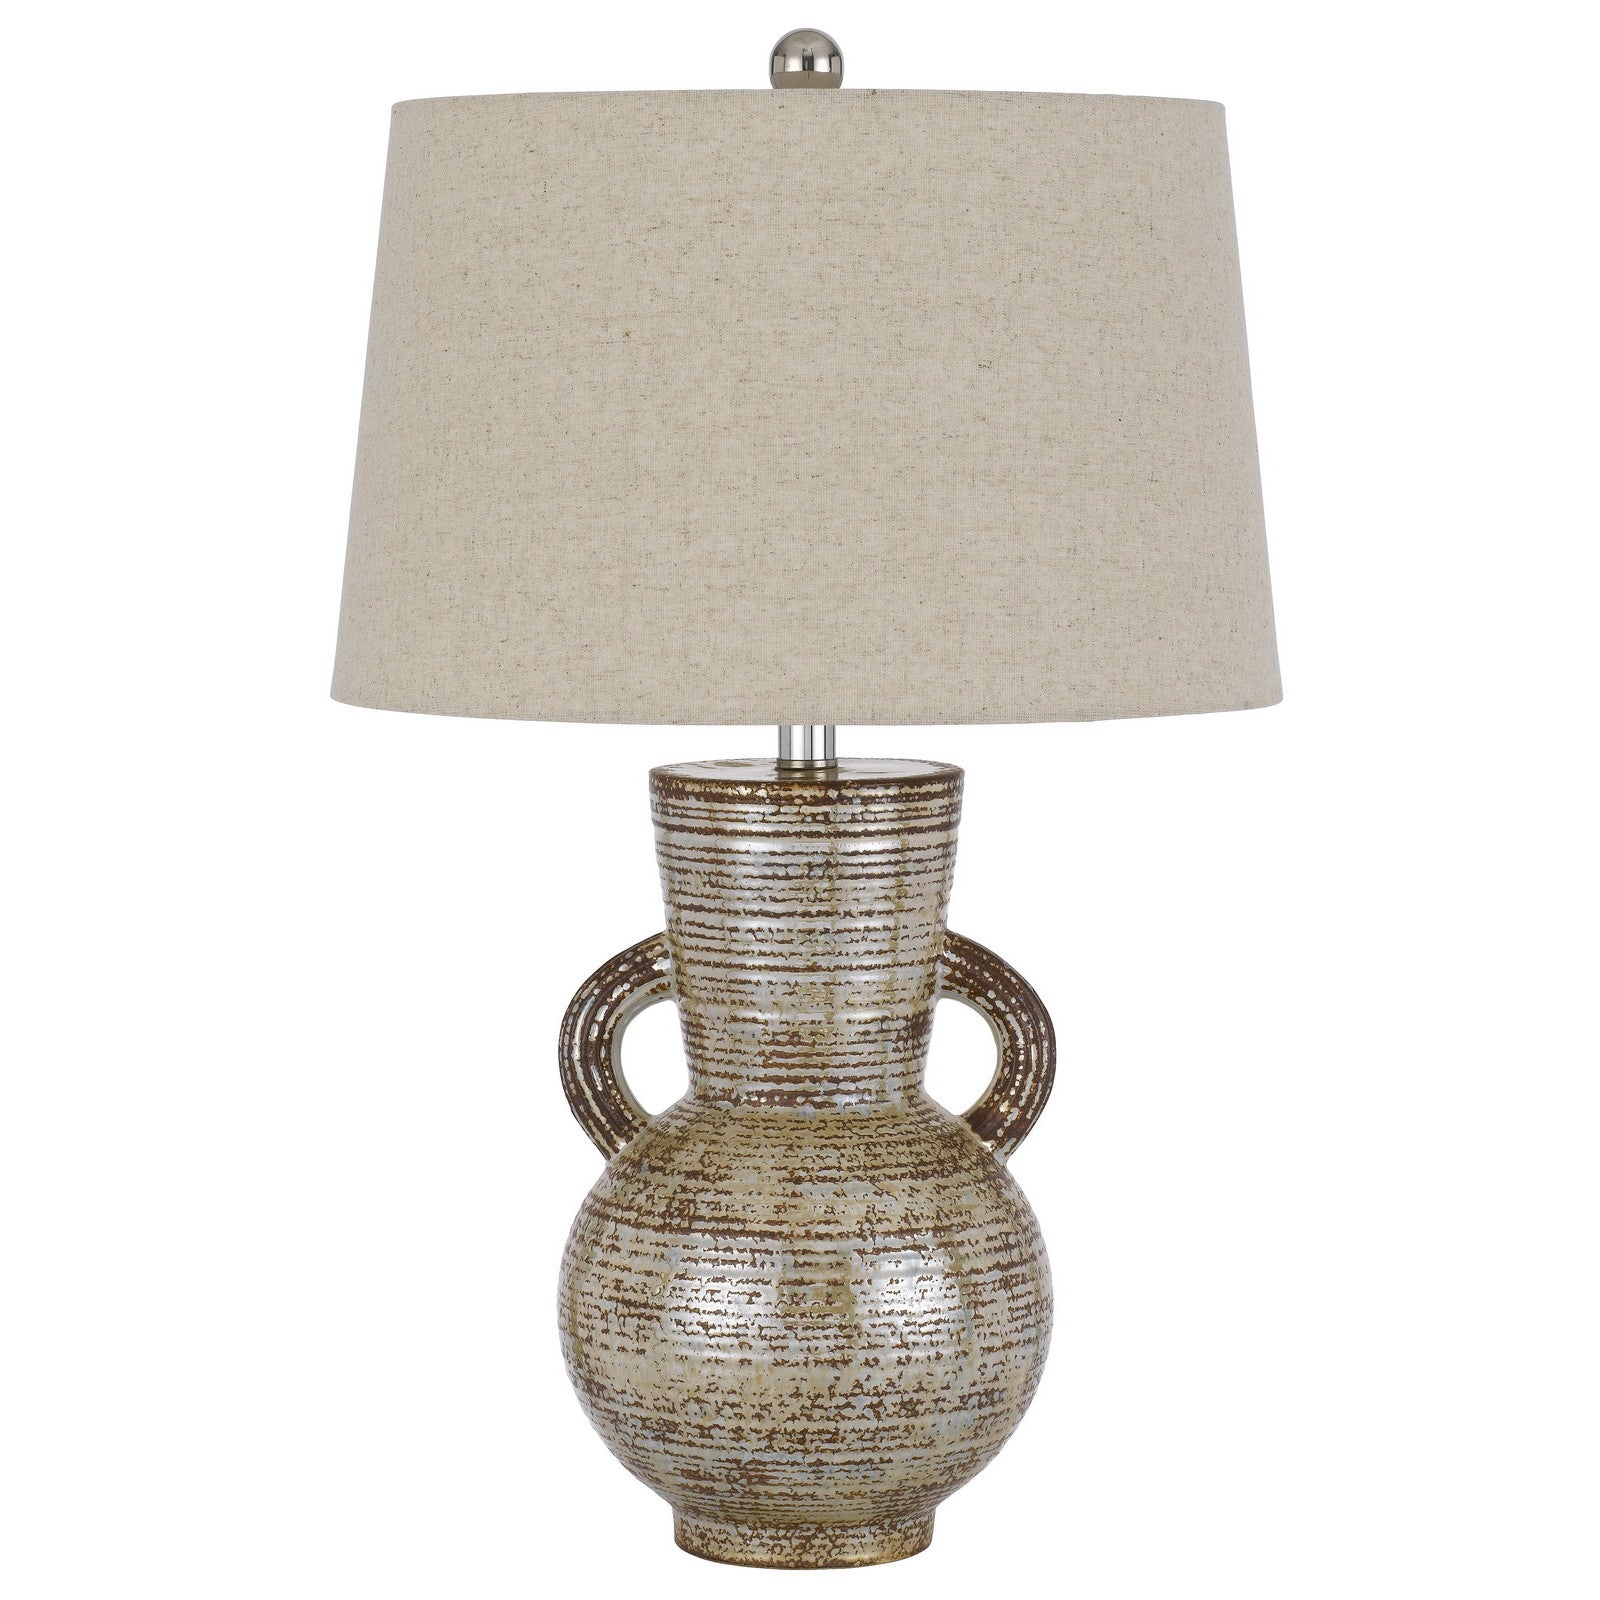 26" Bronze Ceramic Table Lamp With Brown Empire Shade